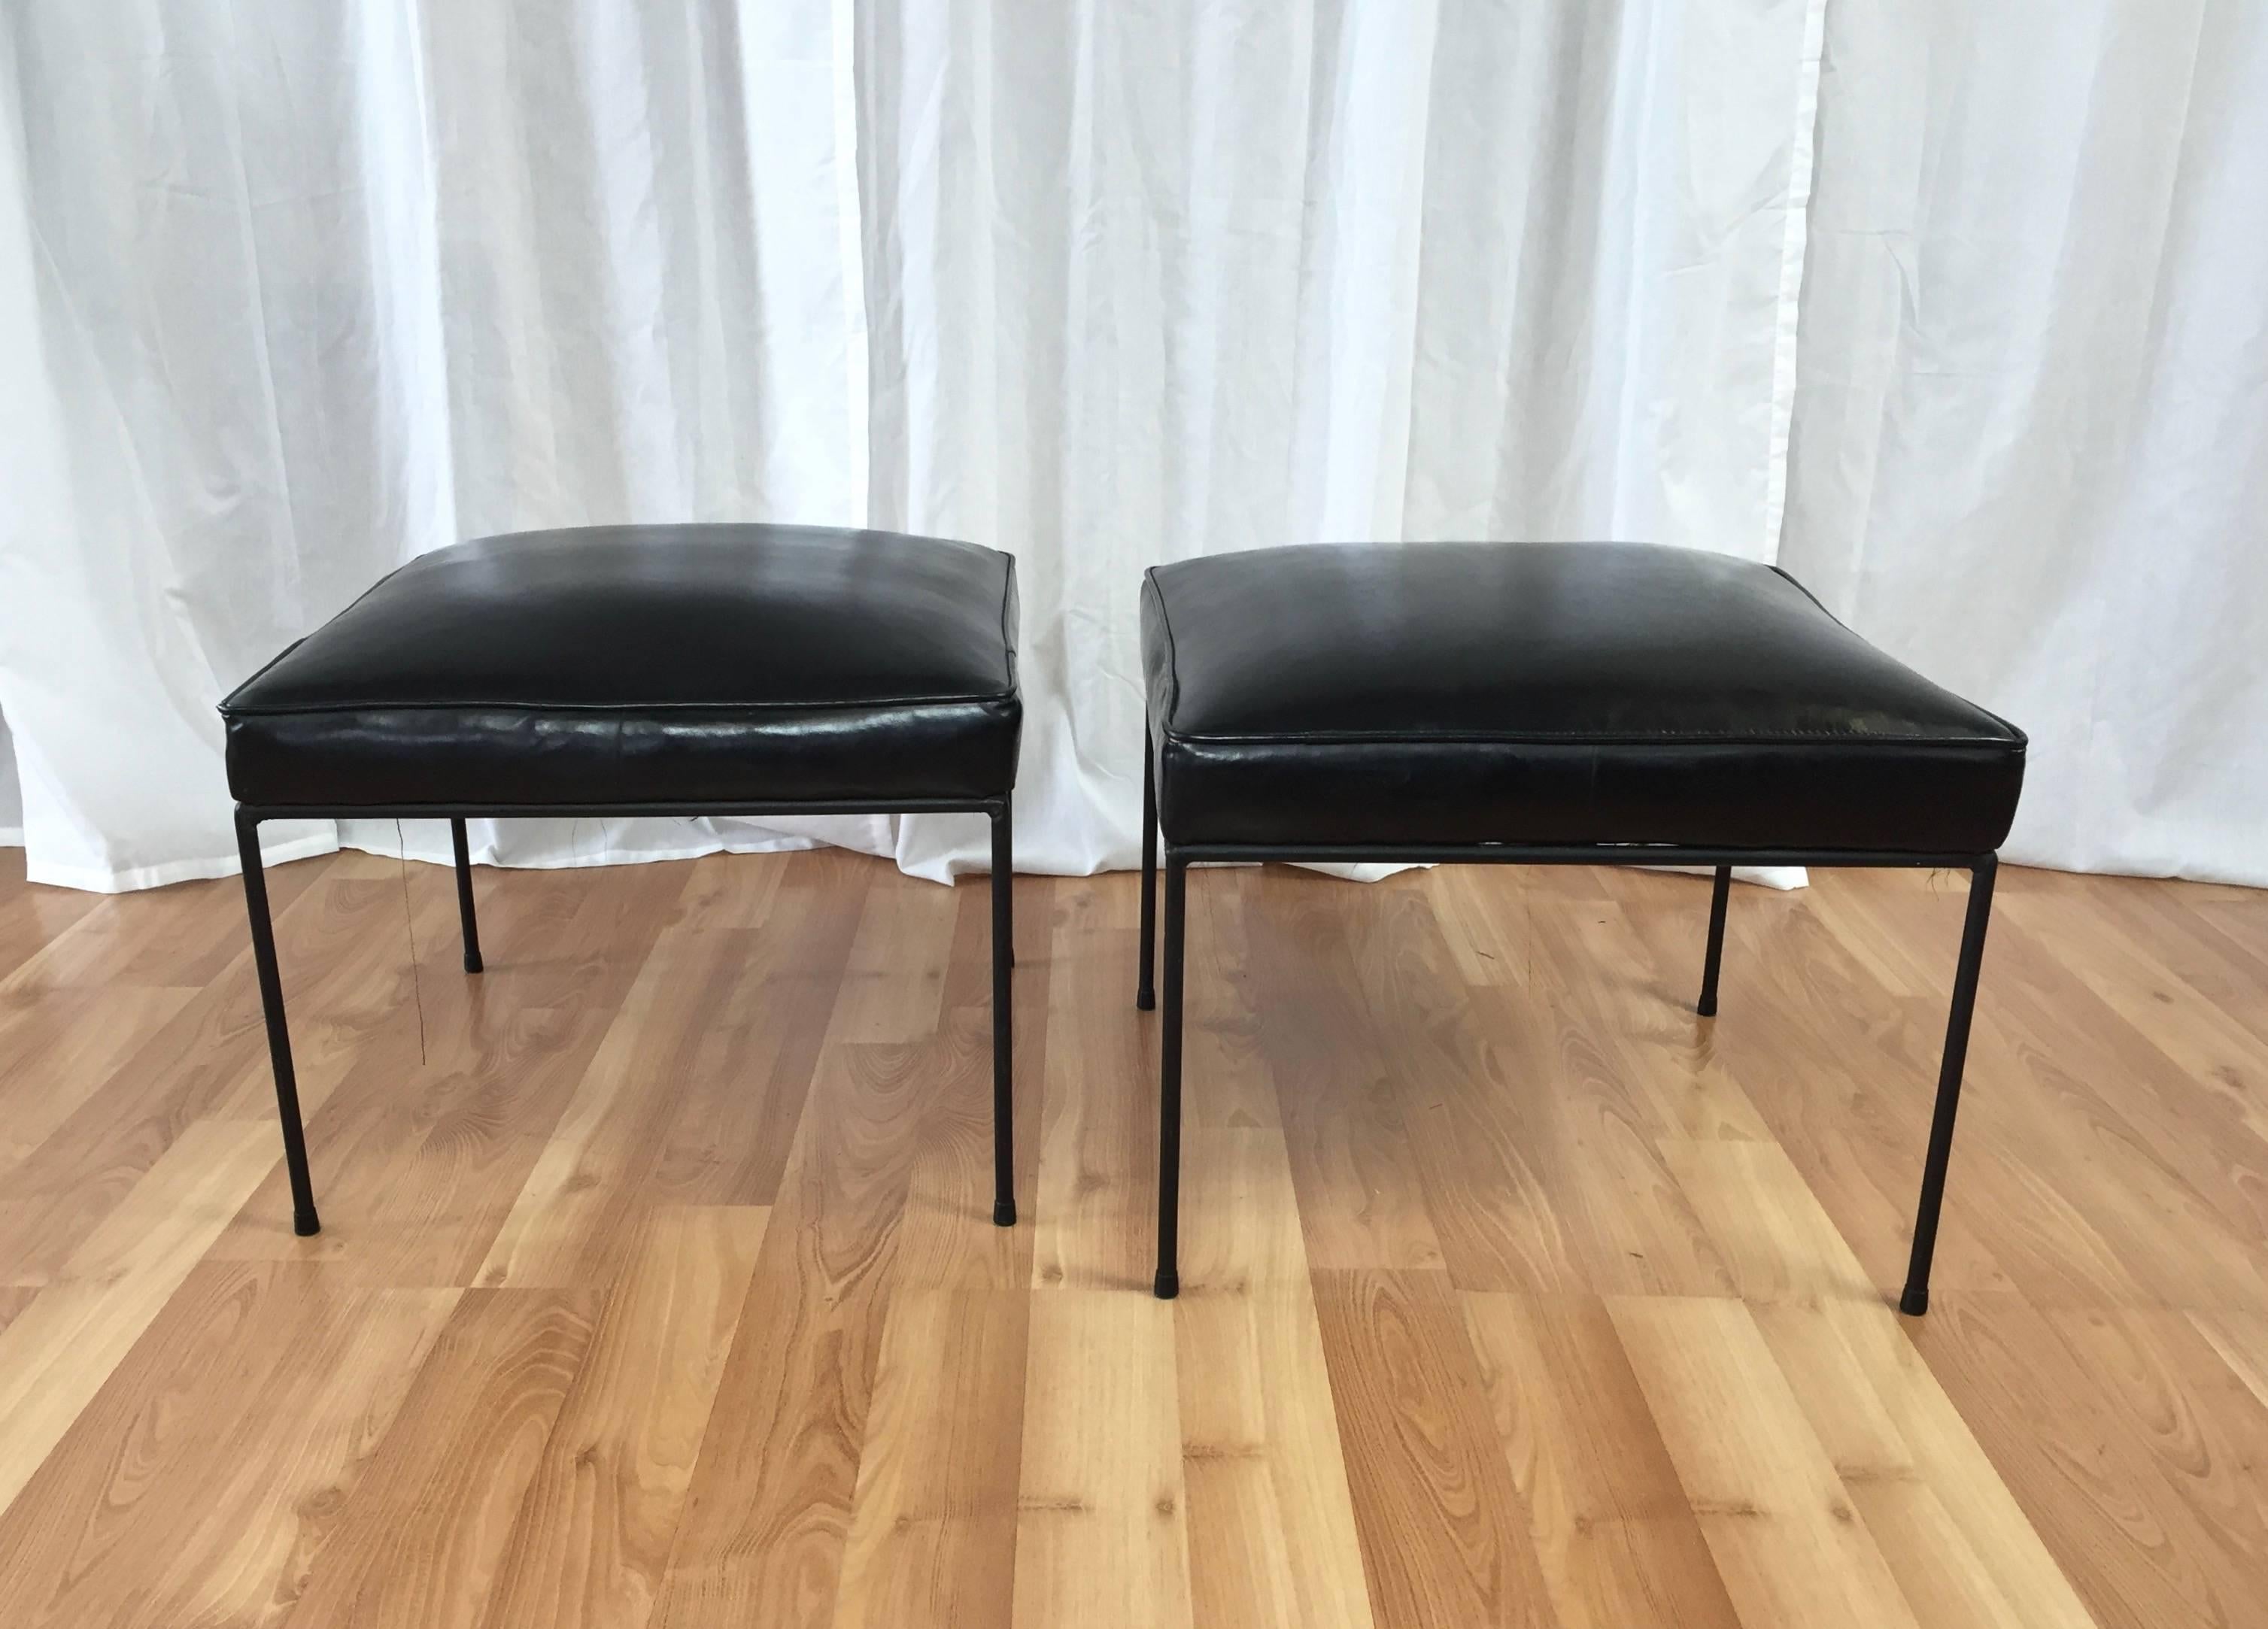 A pair of black wrought iron and faux leather No. 1305 “All ‘Round Square” stools or ottomans by Paul McCobb from the Planner Group line for Winchendon Furniture.

Black enameled iron frame with original rubber feet. Supple original faux leather